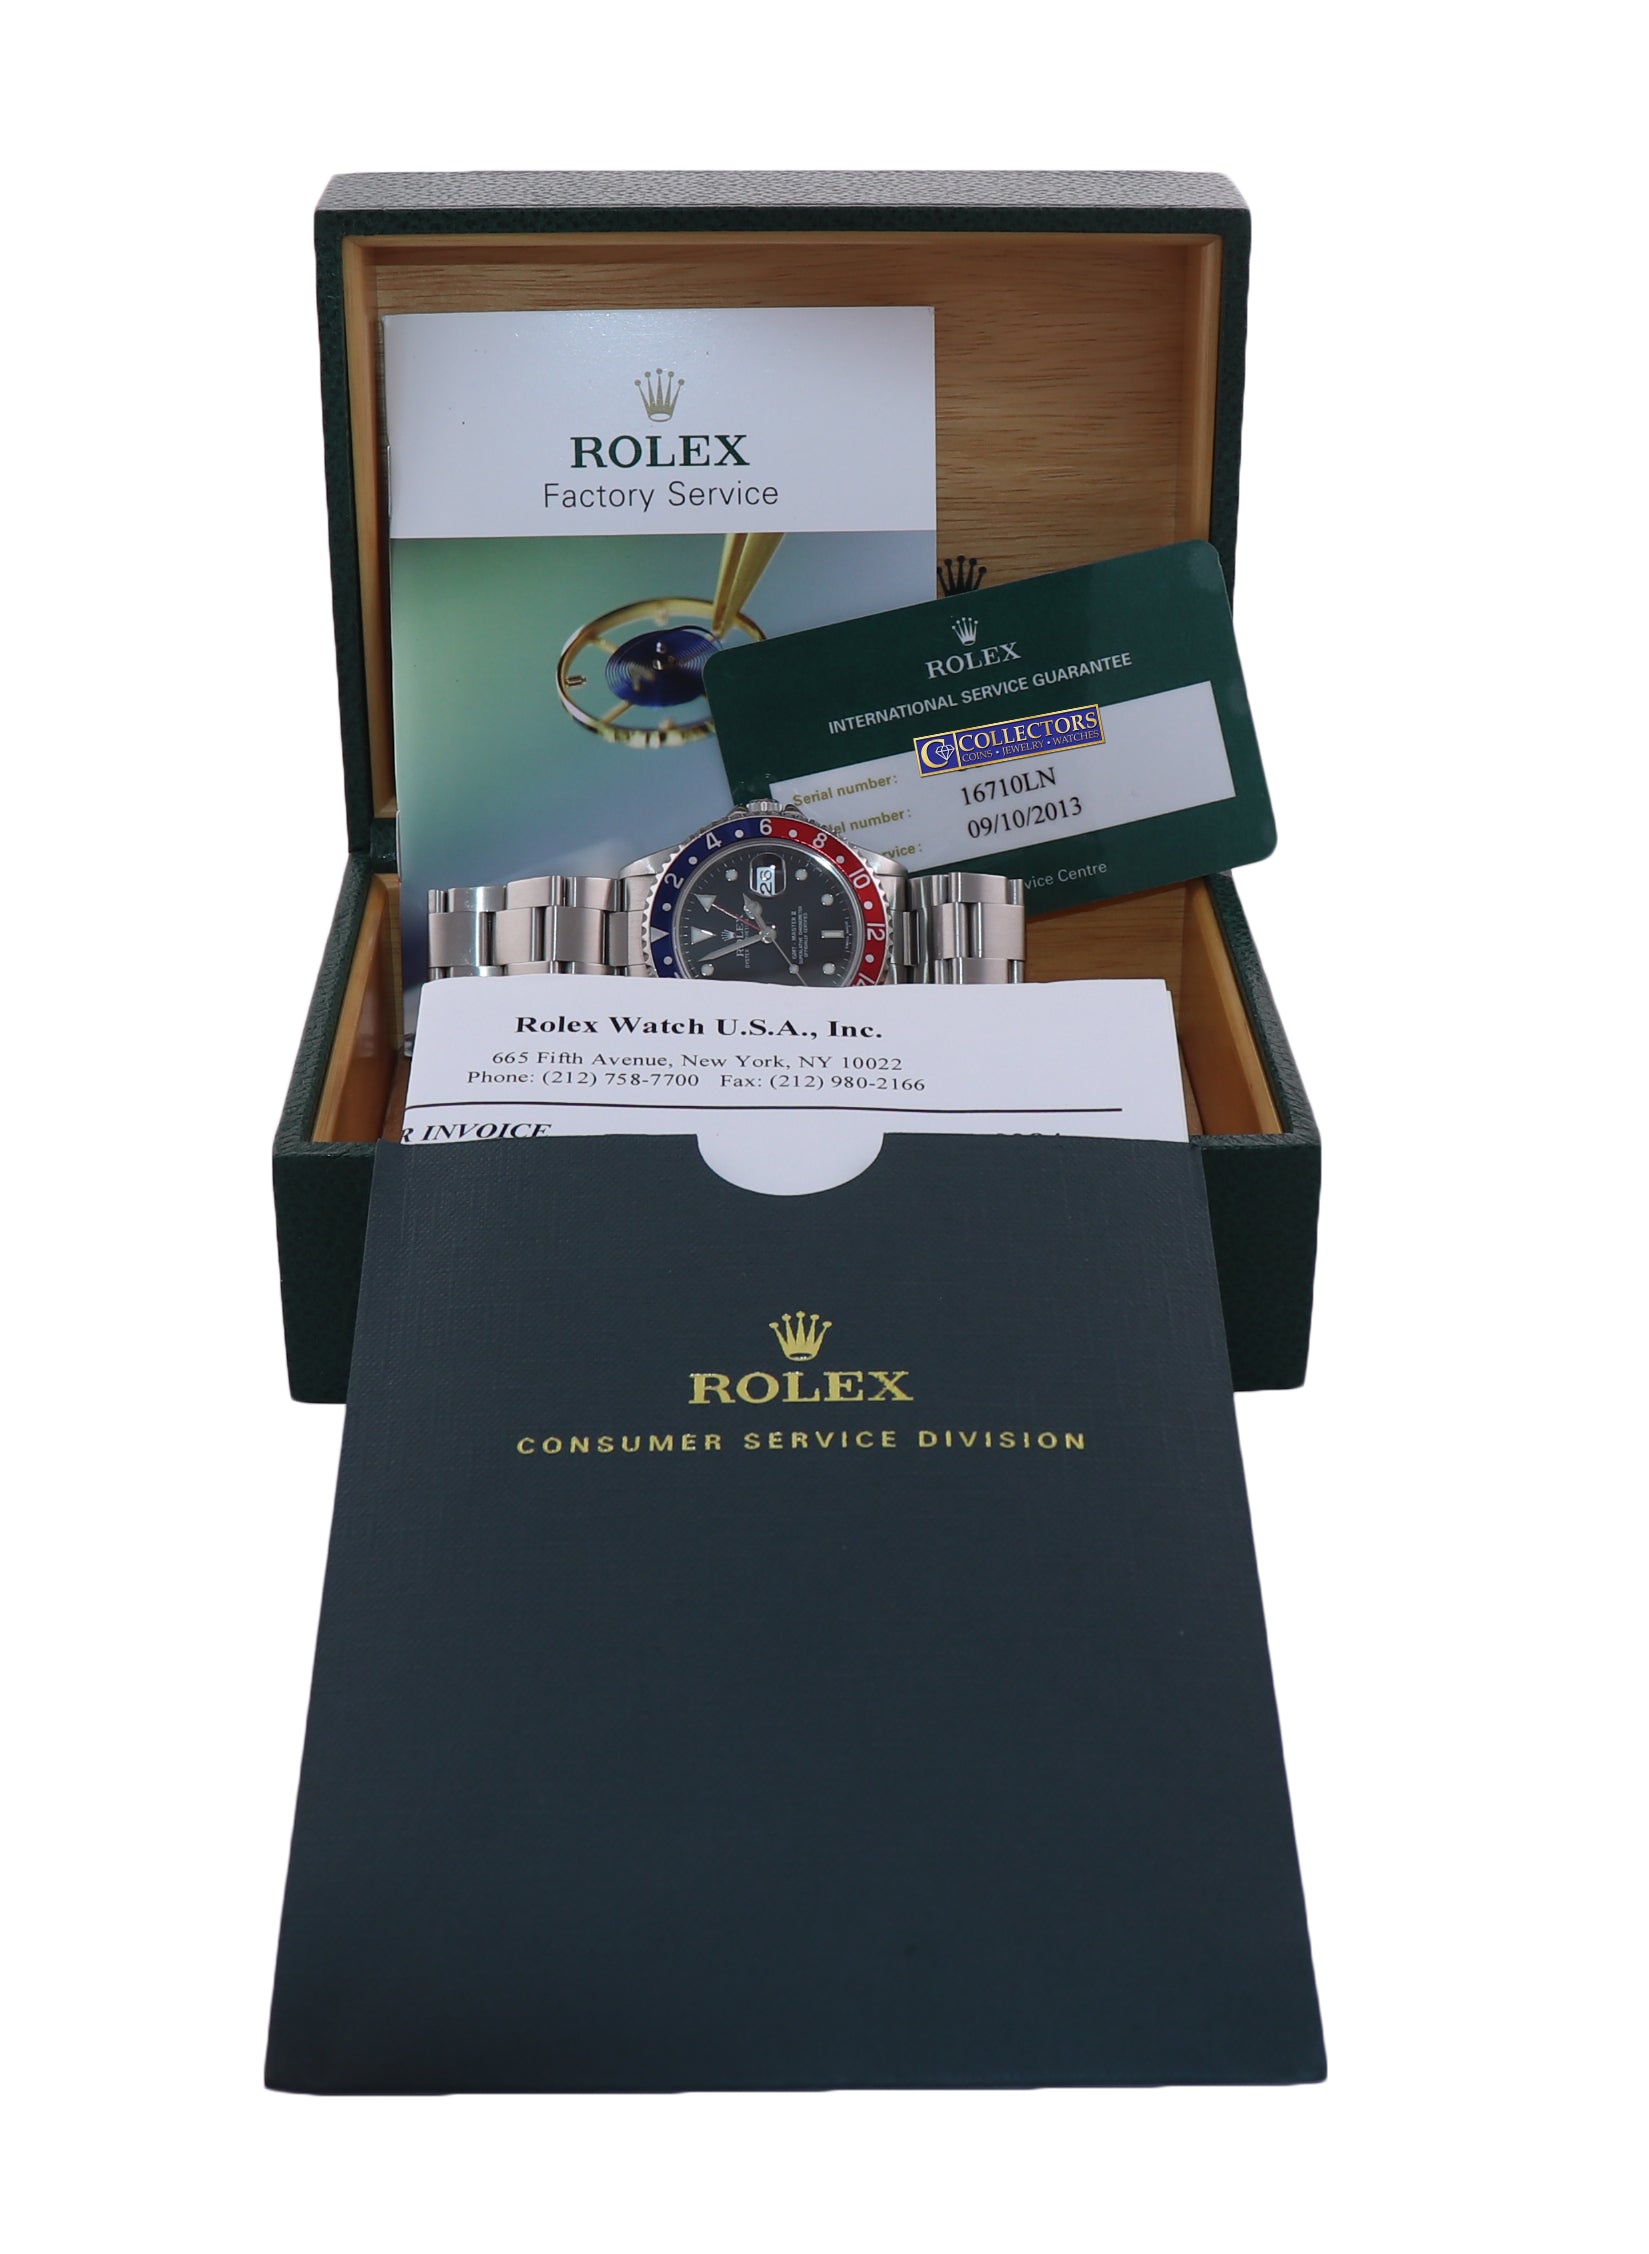 2013 RSC PAPERS Rolex GMT-Master 2 Pepsi Blue Red Steel 40mm 16710 Watch Box